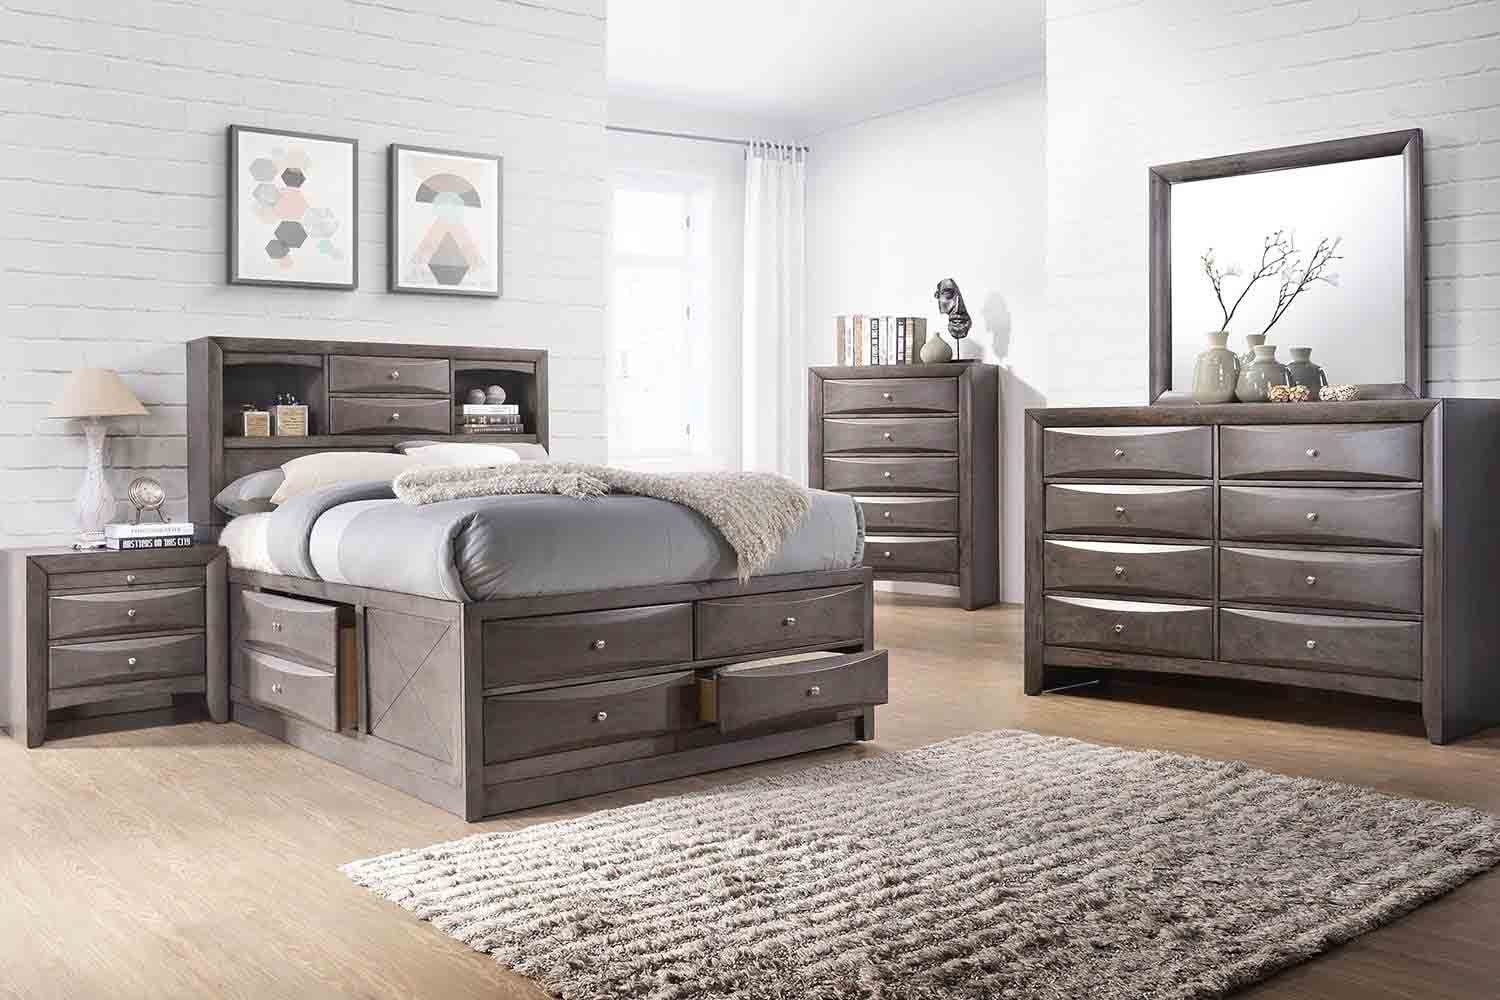 Remi Queen Storage Bed Save Mor Online and In Store